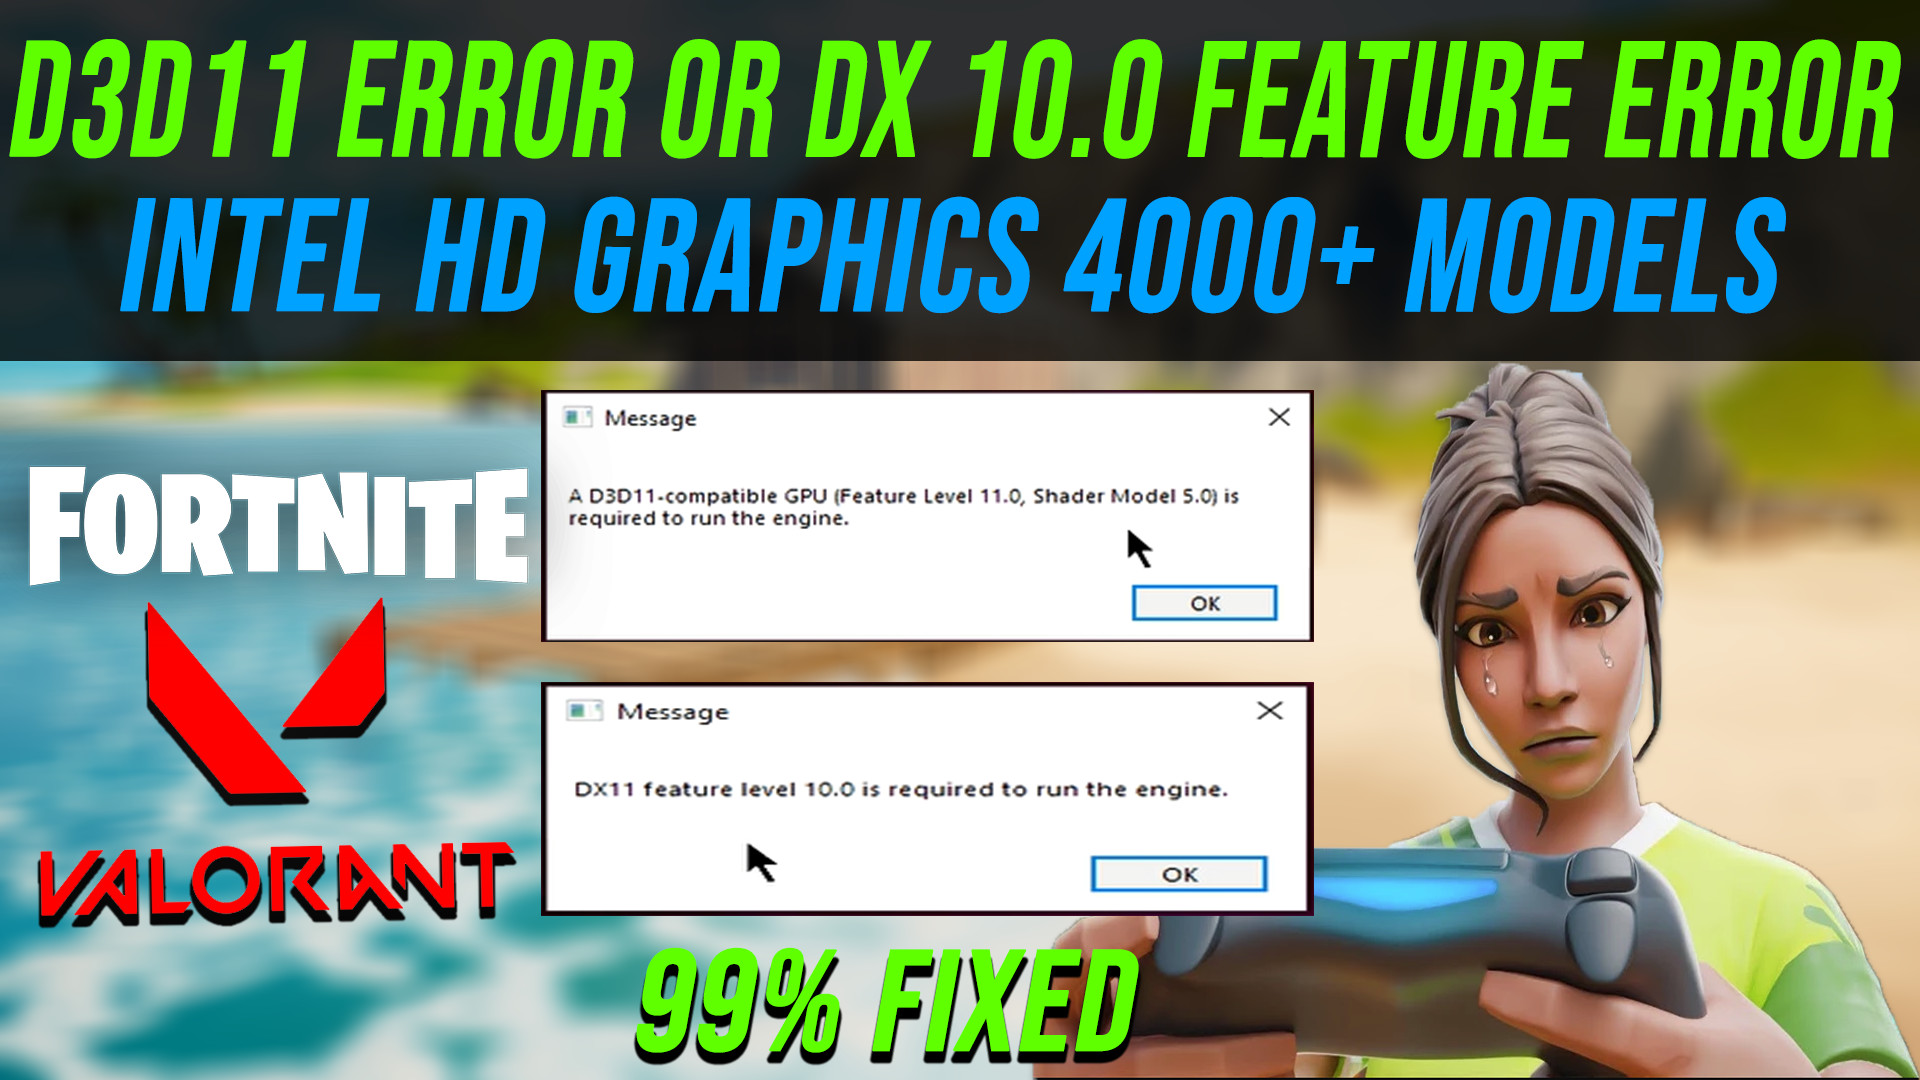 Shader model 6.6 support not detected. D3d11 compatible GPU feature Level 11.0 Shader model 5.0 a. A d3d11 compatible GPU feature Level 11.0 Shader. A d3d11-compatible GPU (feature Level 11.0,Shader model 5.0) is required to Run the engine valorant. Что значит a d3d11-compatible GPU feature Level 11.0 Shader model 5.0 is required to Run the engine.